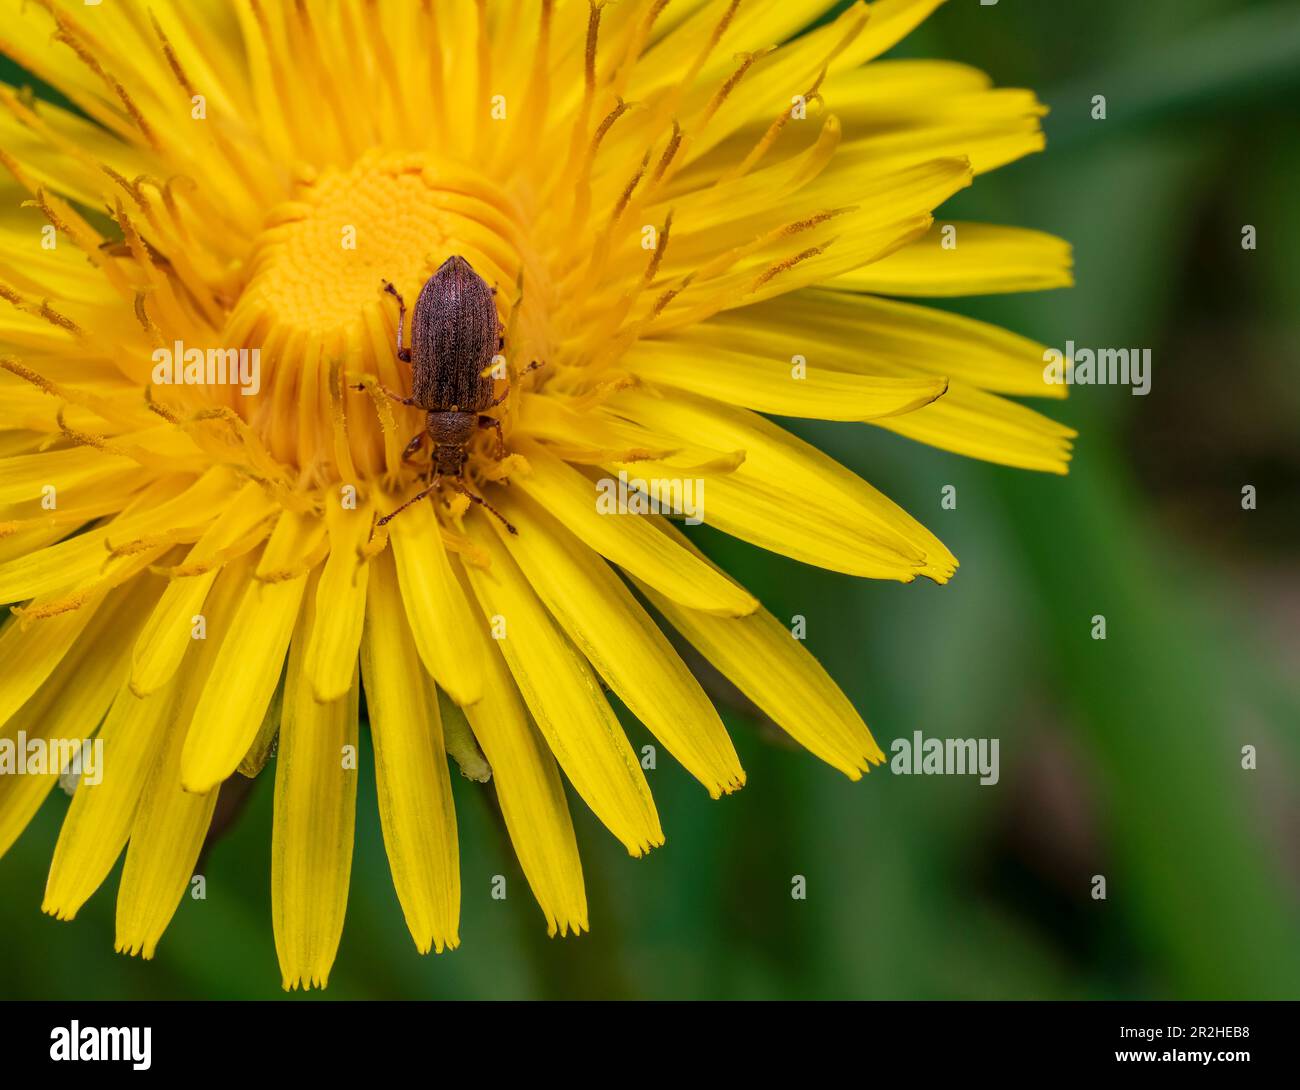 Common leaf weevil on flowering yellow dandelion blossom Stock Photo